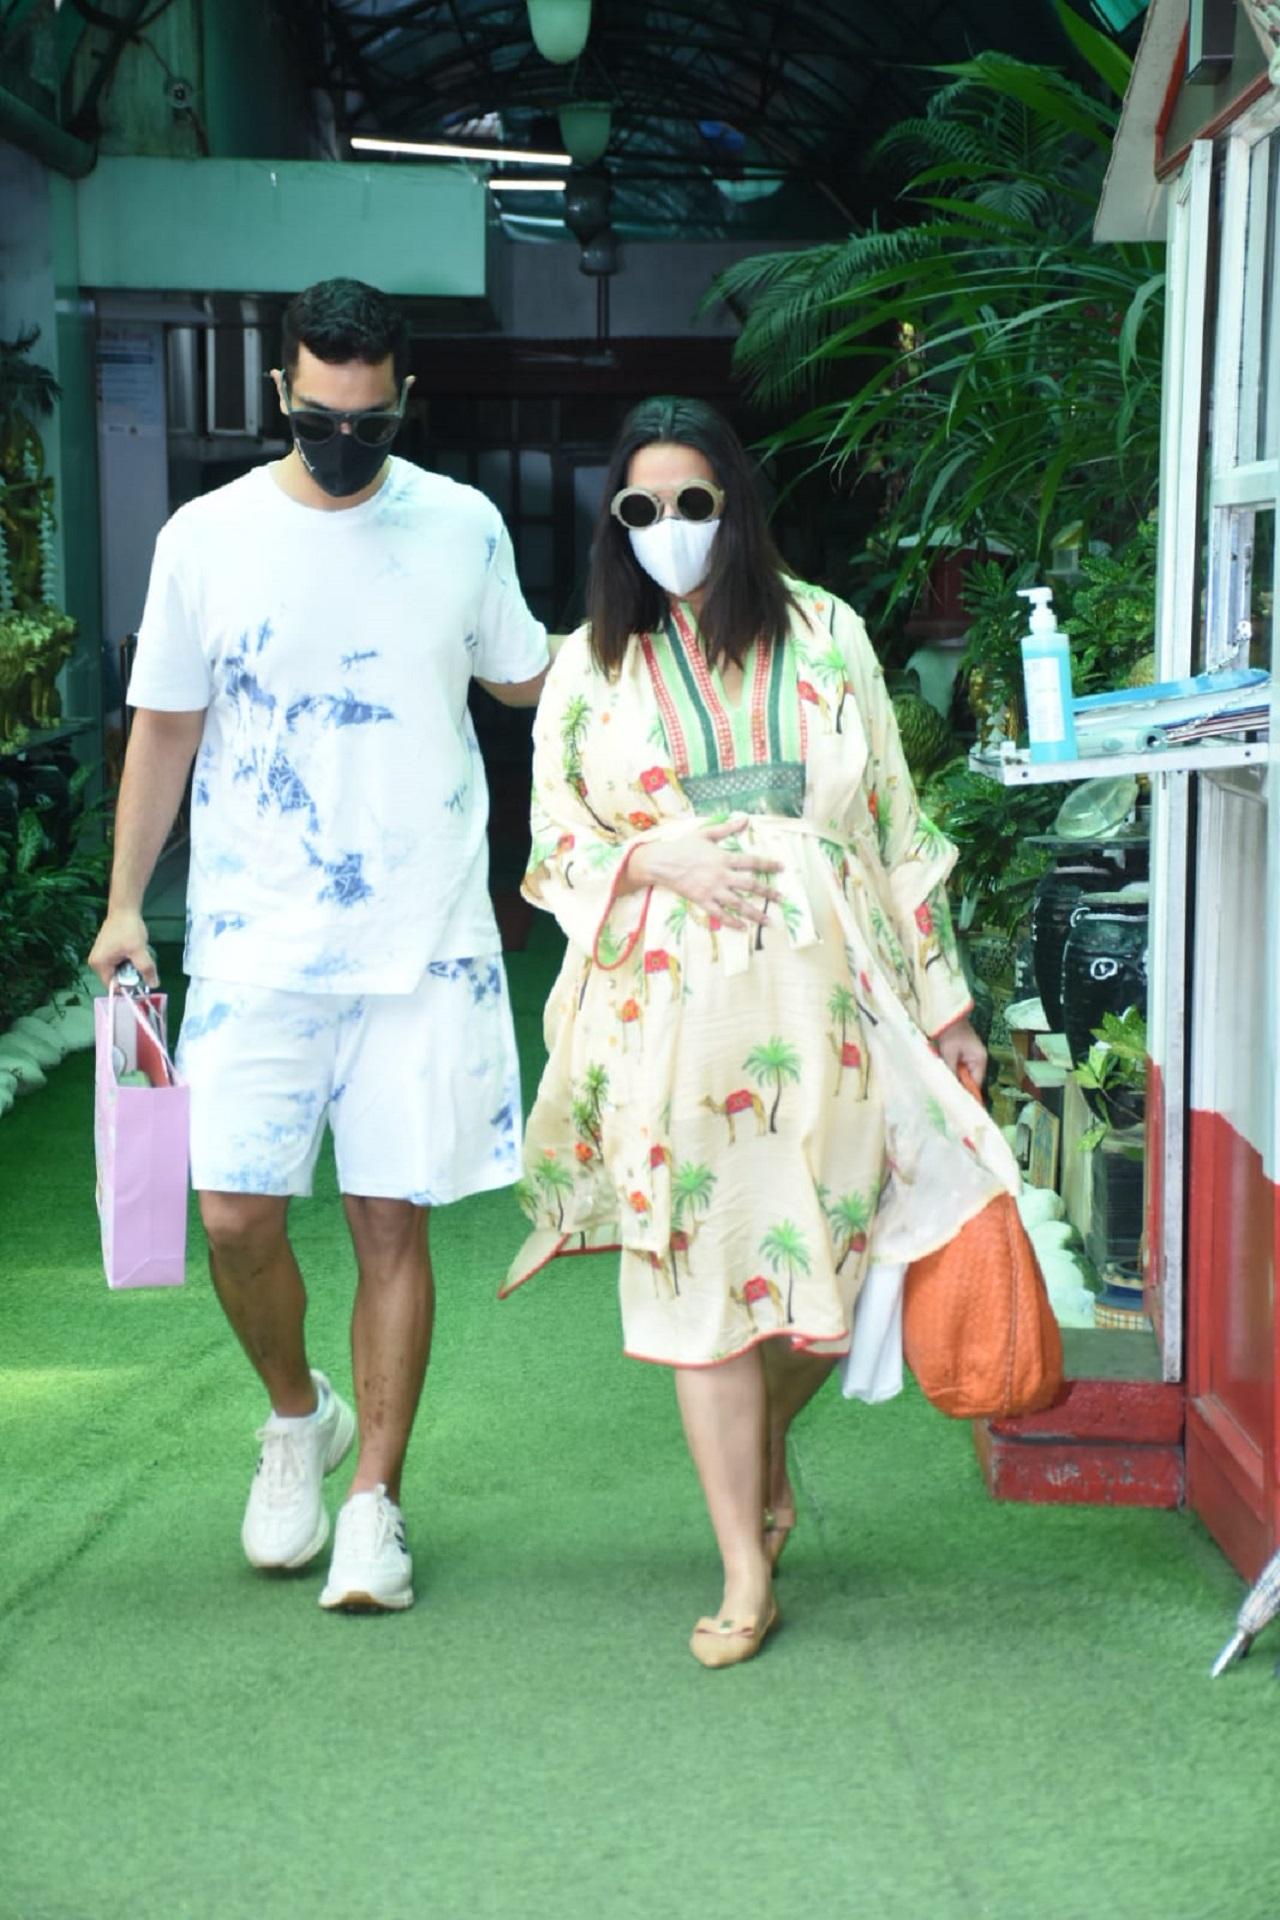 Neha Dhupia and Angad Bedi got married in May 2018 and embraced parenthood in November in the same year when the actress gave birth to a baby girl they named Mehr. The couple is all set to welcome their second child and Dhupia was in for a surprise when Soha Ali Khan and other friends threw a surprise baby shower at her house.